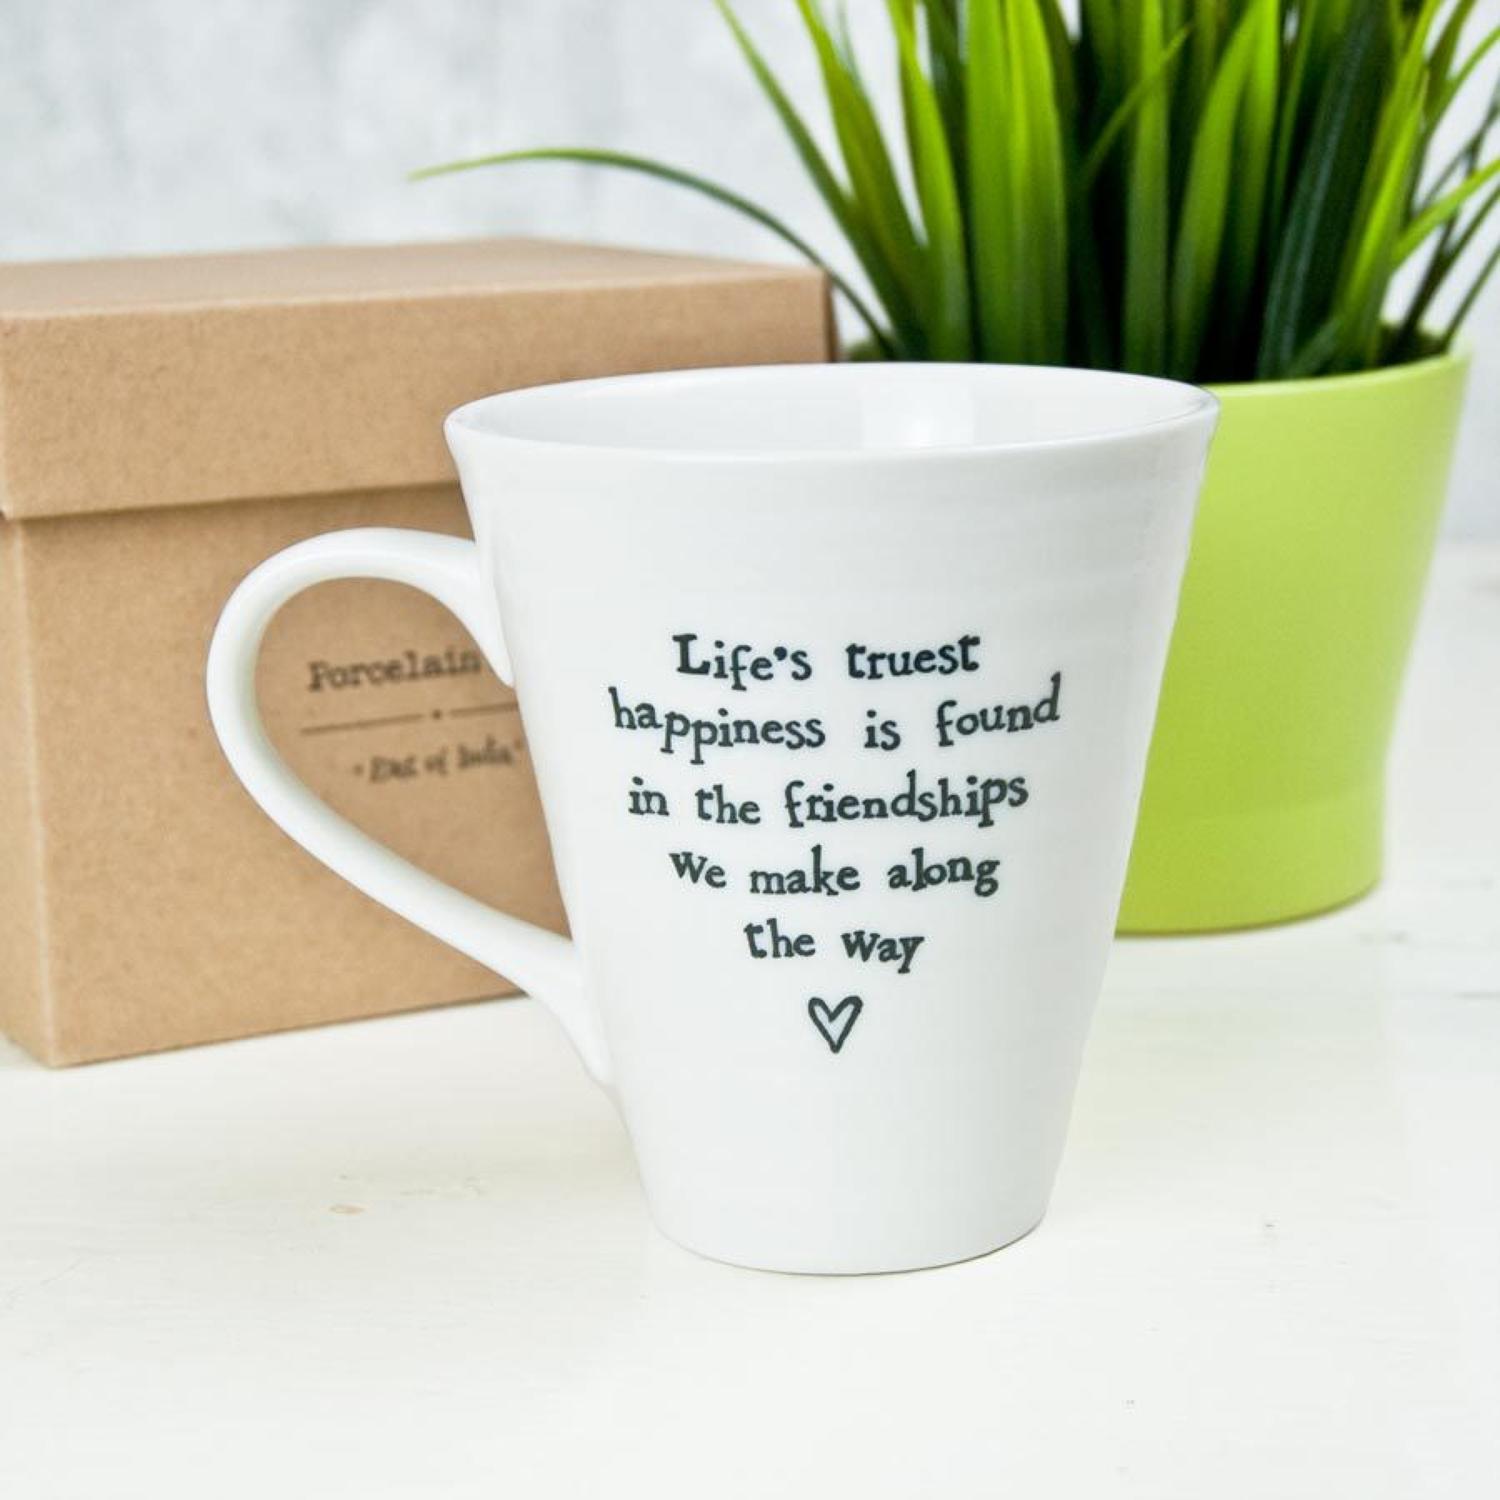 East of India - Boxed porcelain mug - Life's truest happiness'